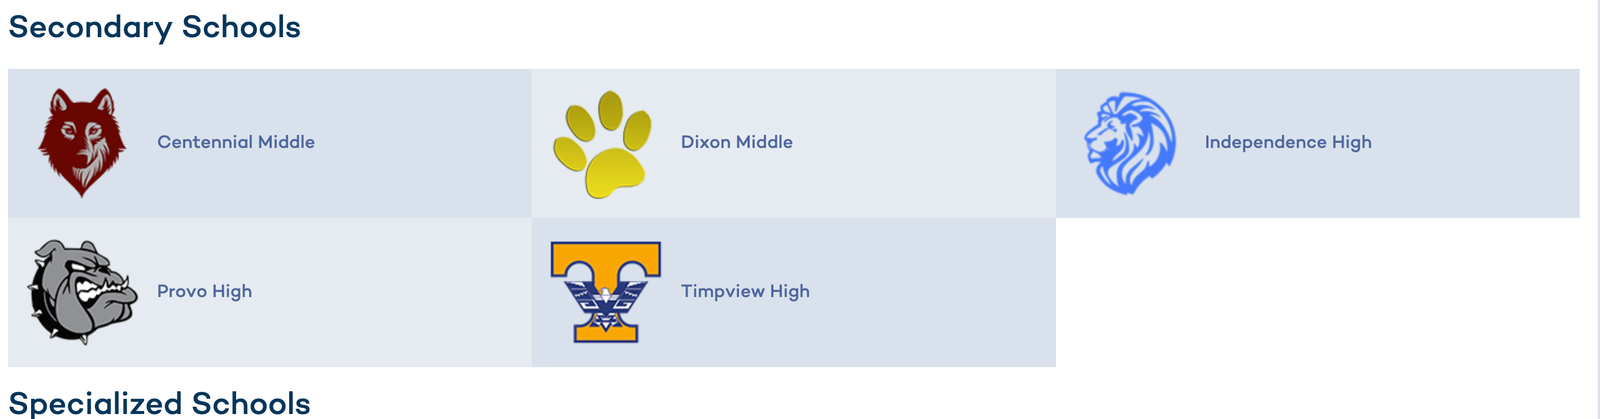 Here is a visual chart of the secondary schools in Indian Hills and Provo Utah 